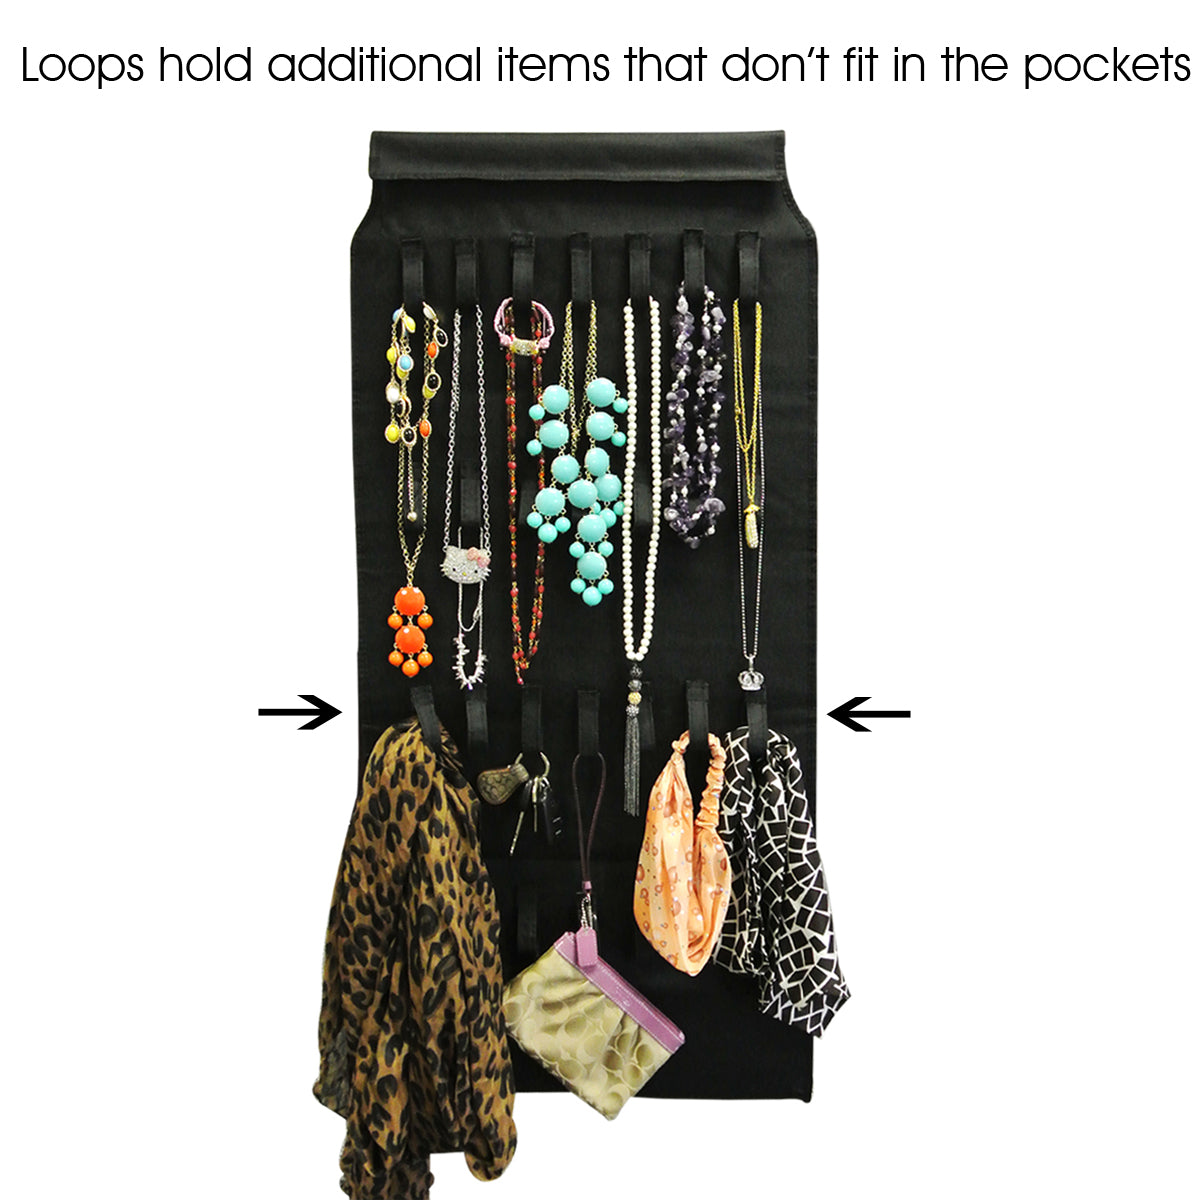 39 Pocket with 28 Holding Loops Polyester Hanging Jewelry Organizer